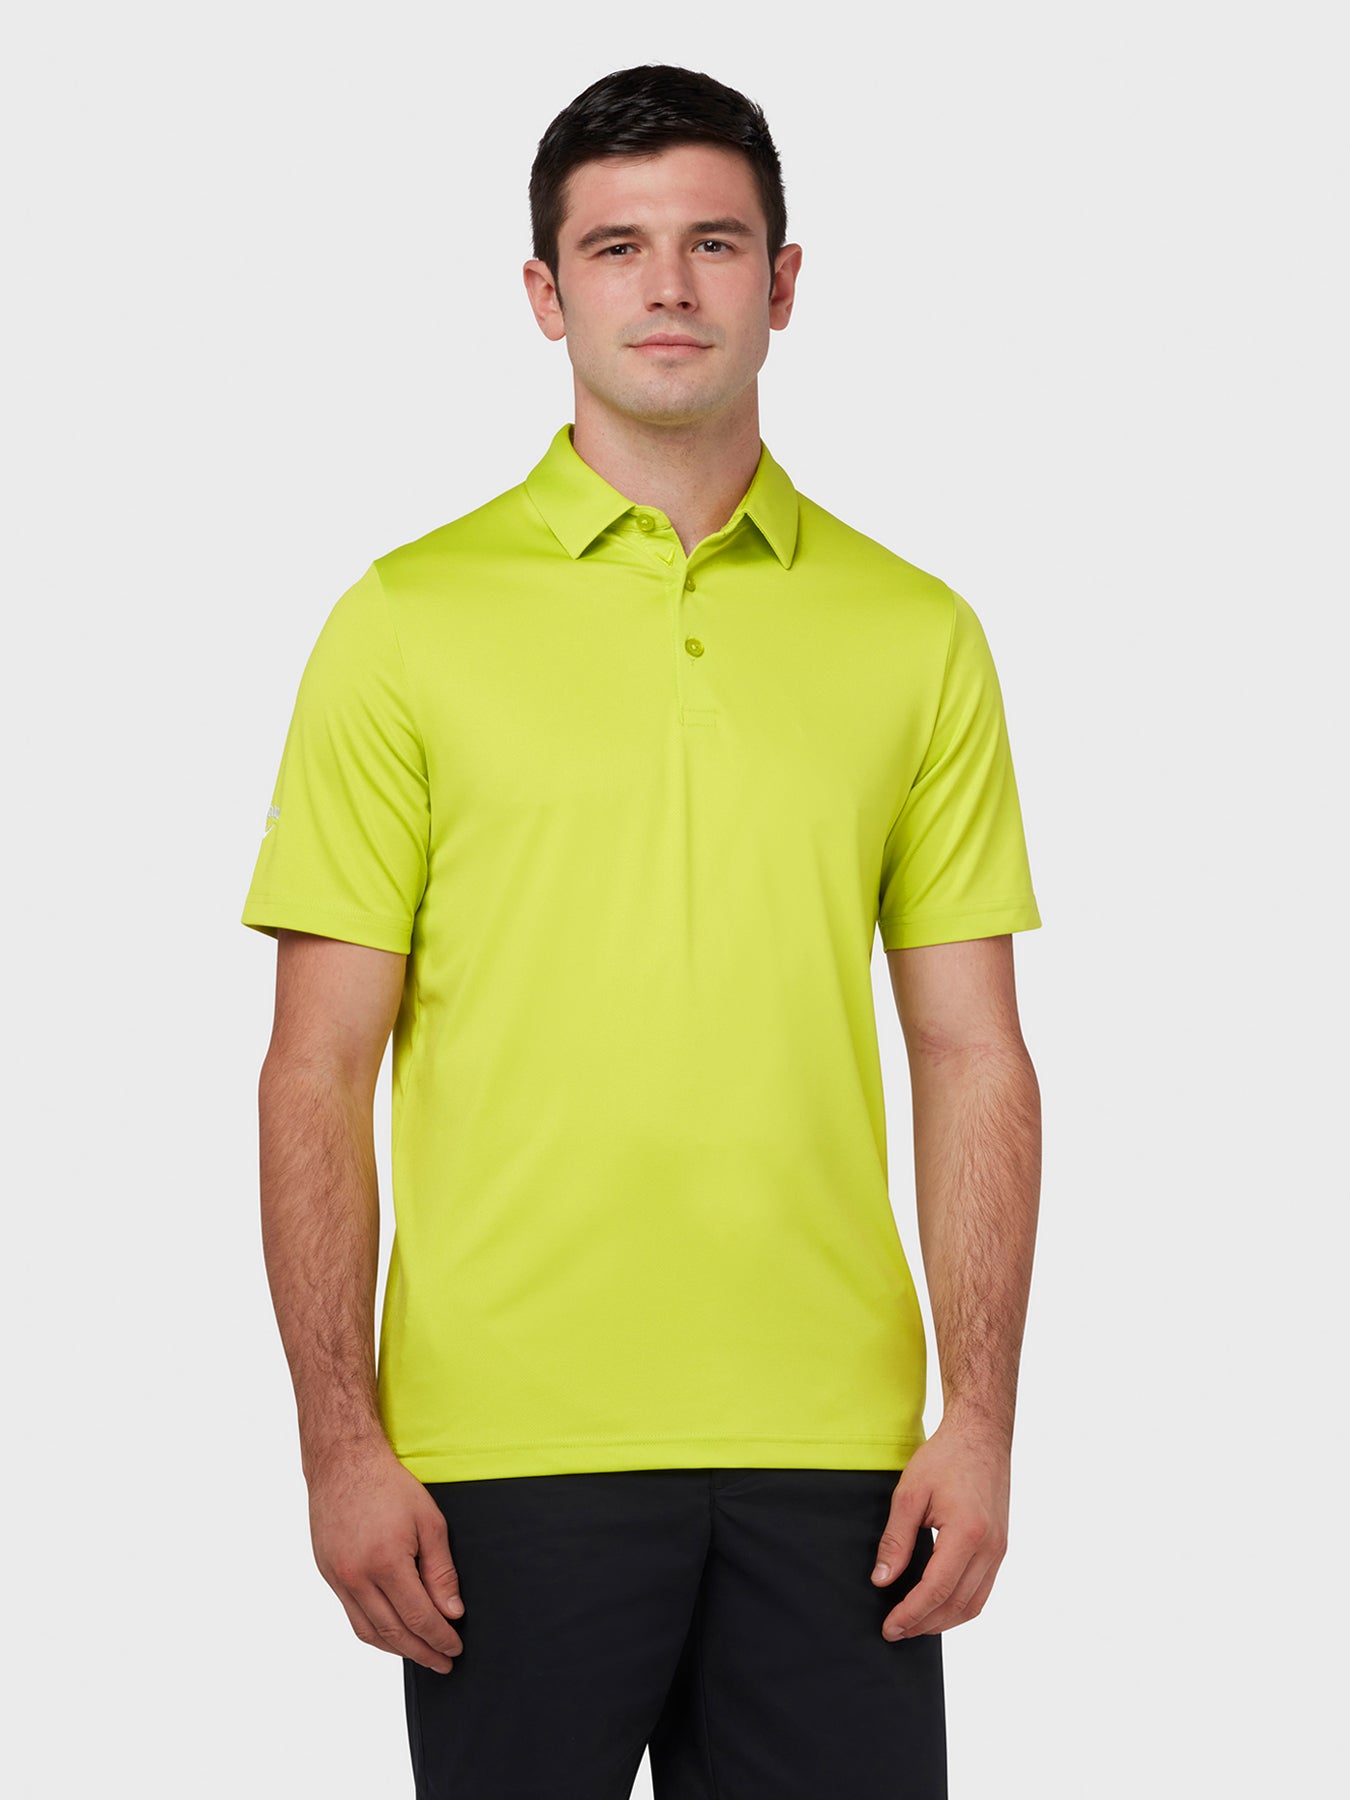 View Swing Tech Tour Polo In Surreal Green Surreal Green XXL information